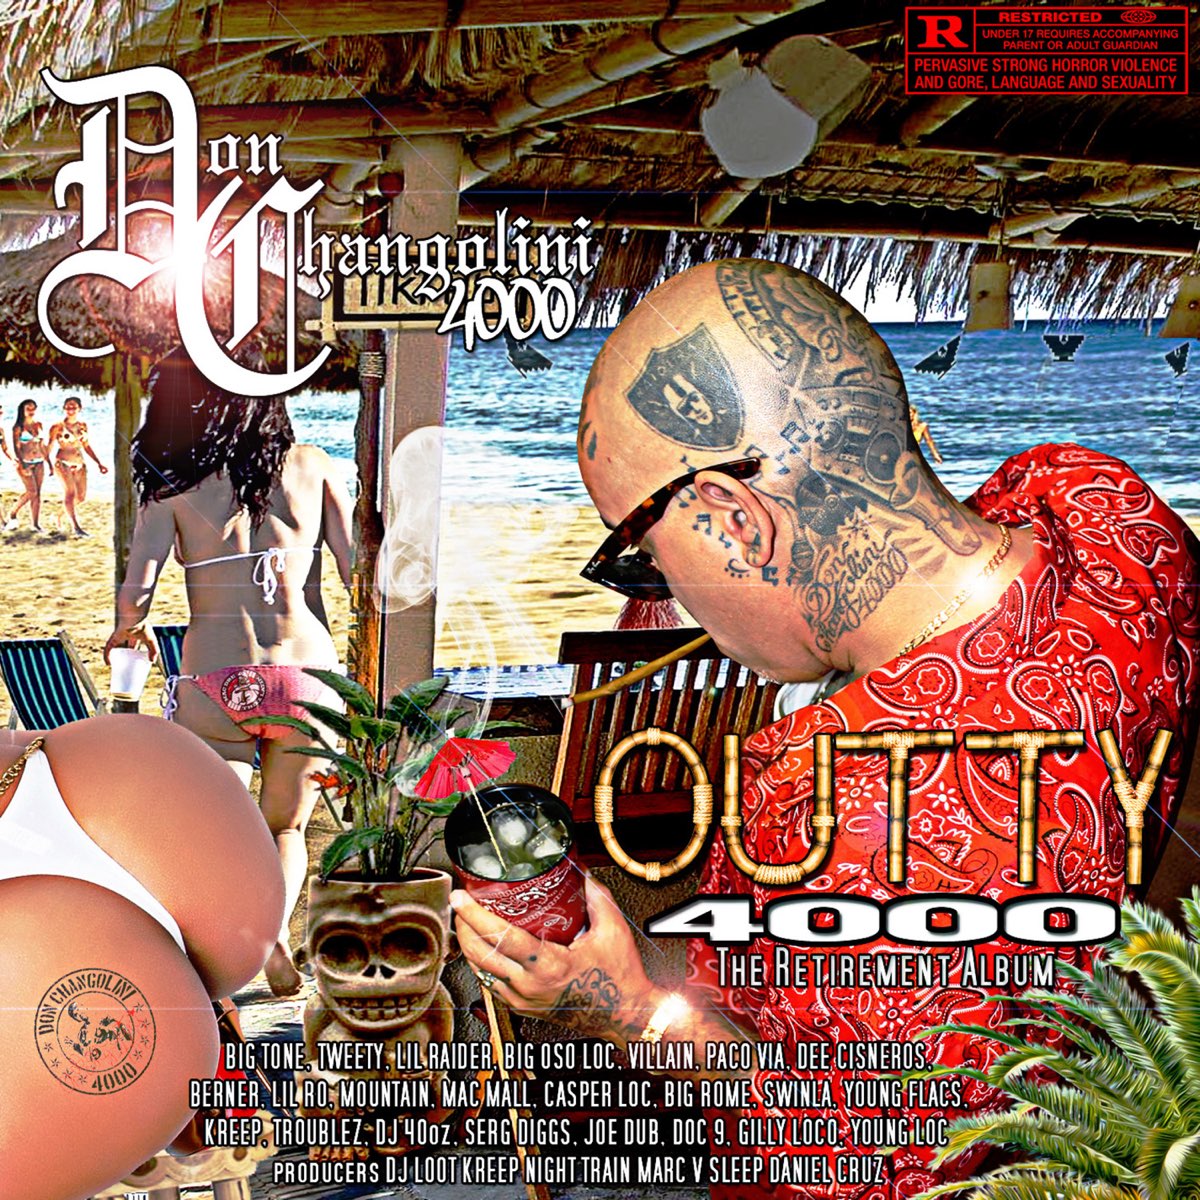 Don Changolini 4000 - Outty 4000 (The Retirement Album)